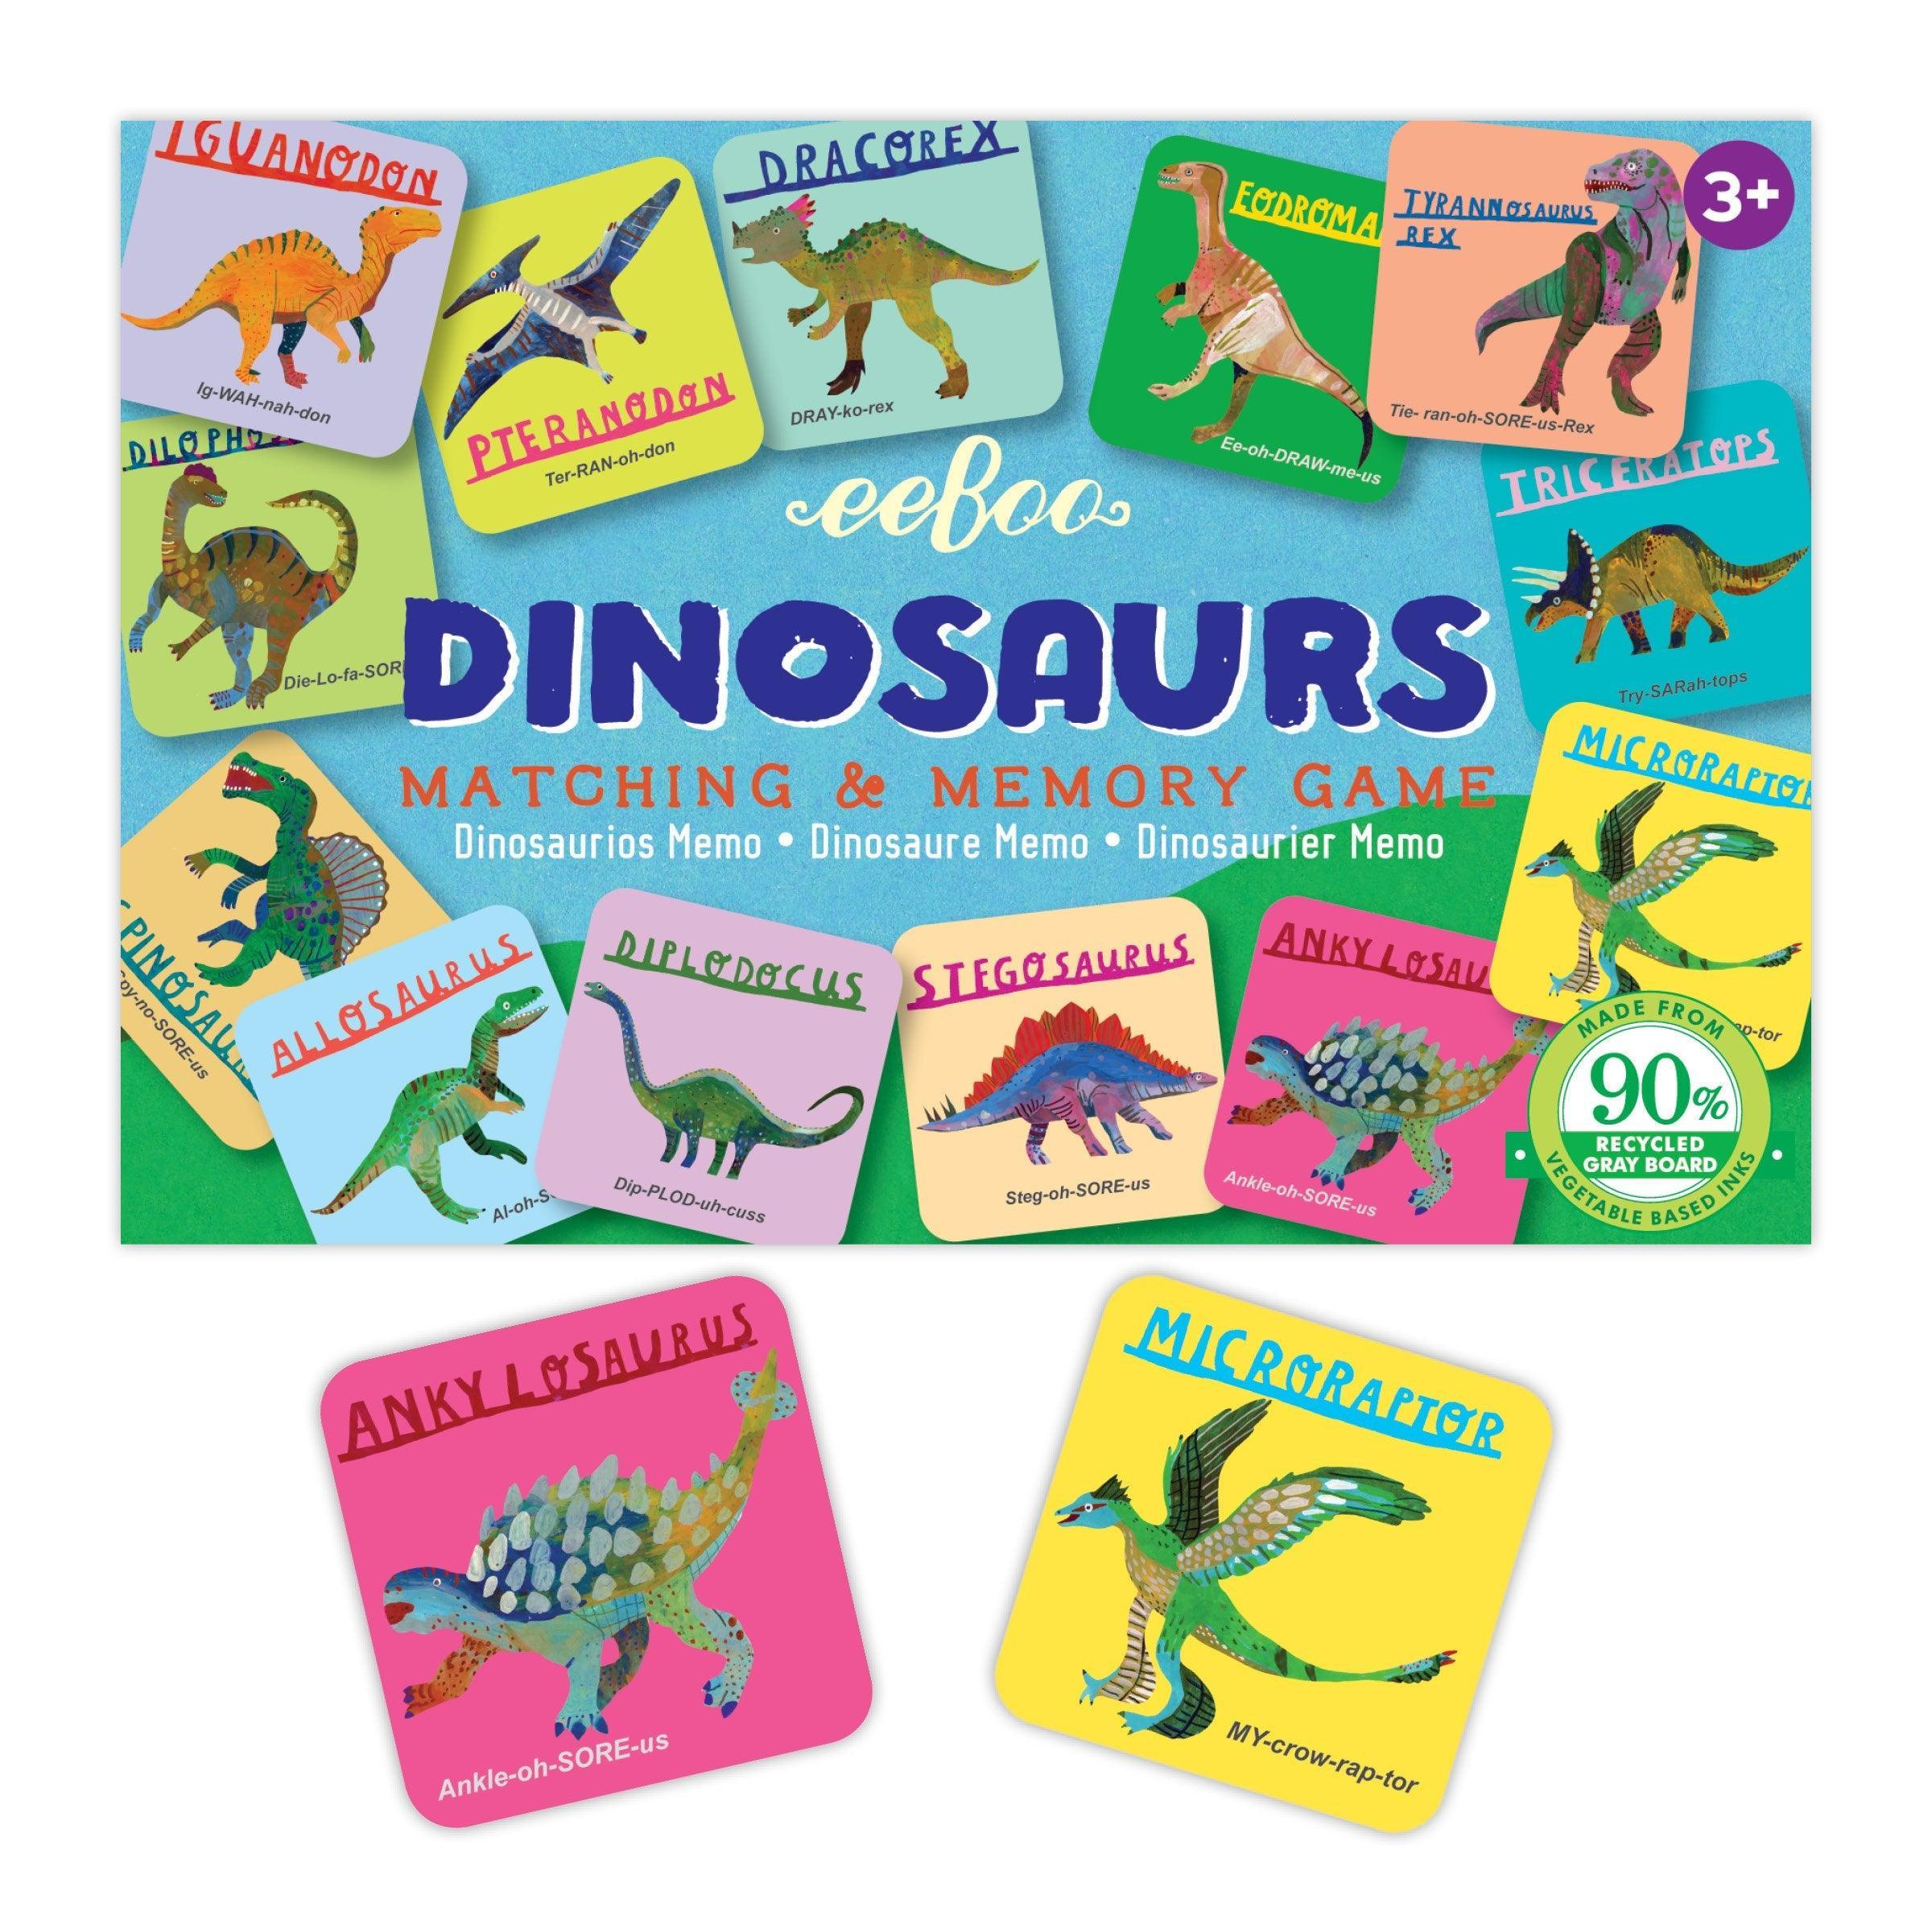 Dinosaurs Memory & Matching Game - Why and Whale